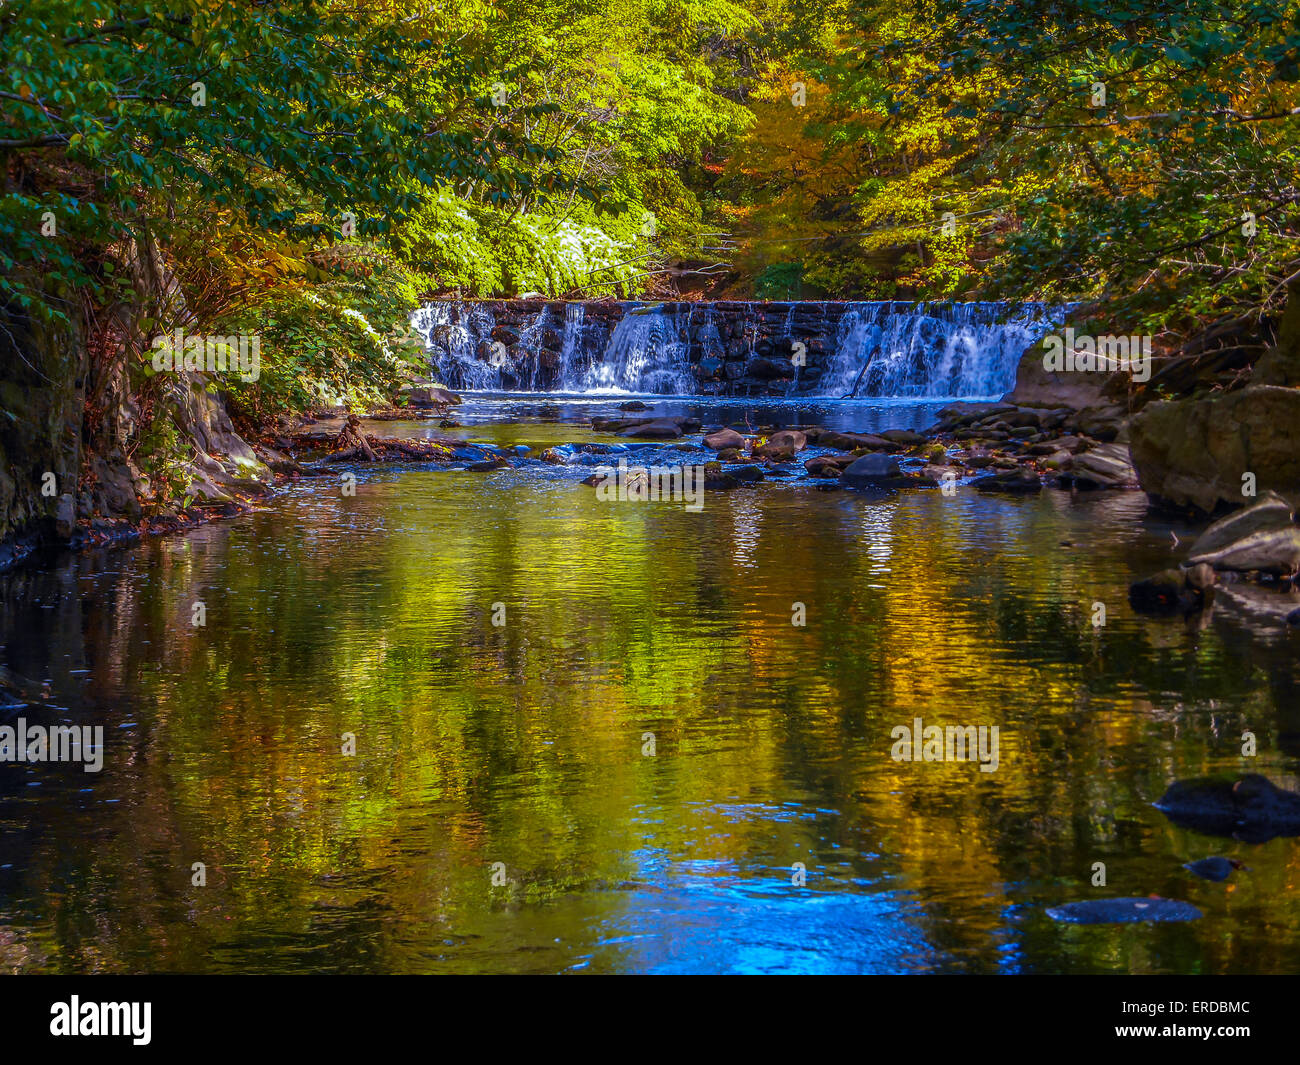 Waterfall in an Autumn setting with Fall foliage and river reflections using deep focus Stock Photo